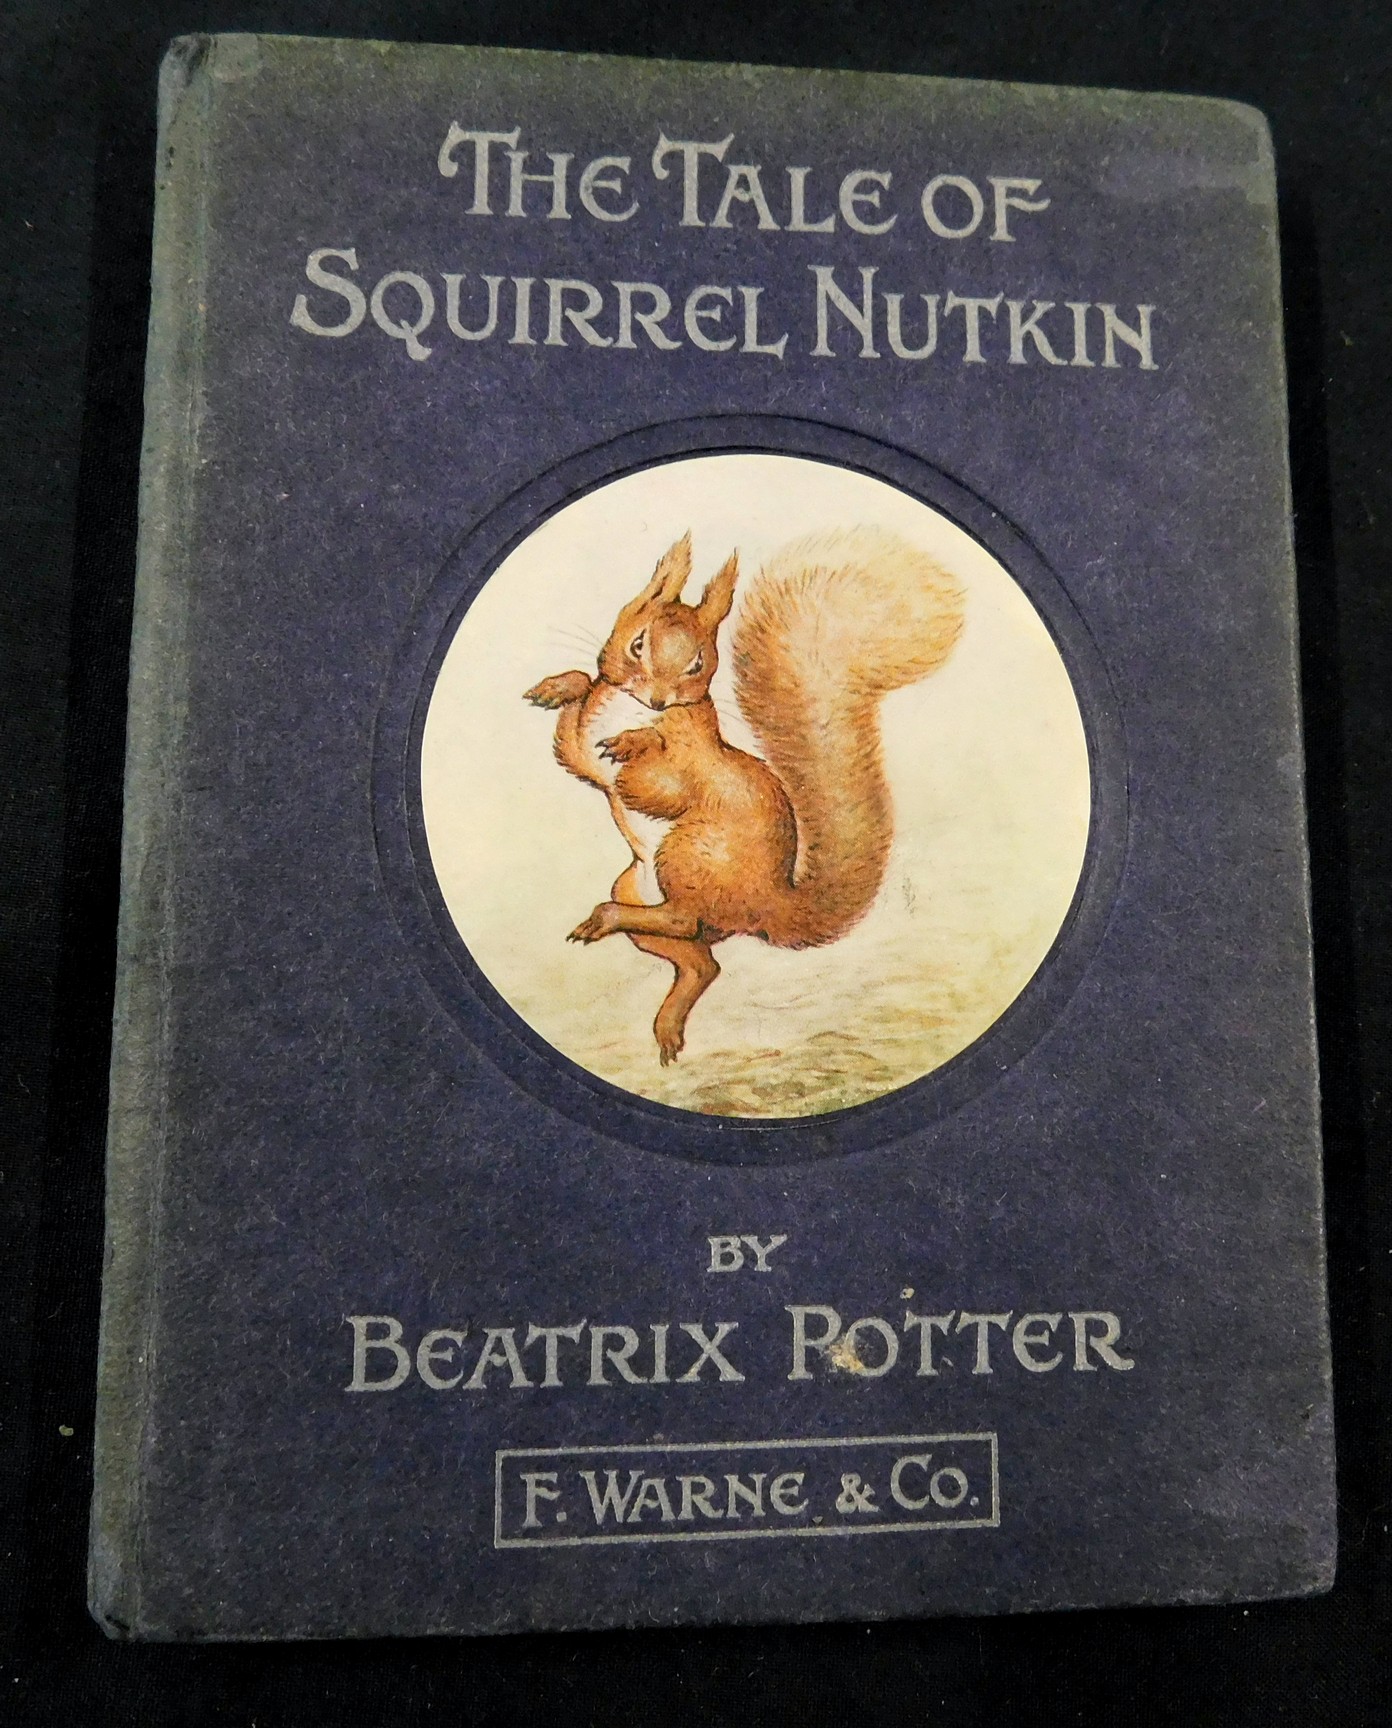 BEATRIX POTTER: THE TALE OF SQUIRREL NUTKIN, London and New York, Frederick Warne, 1903, 1st